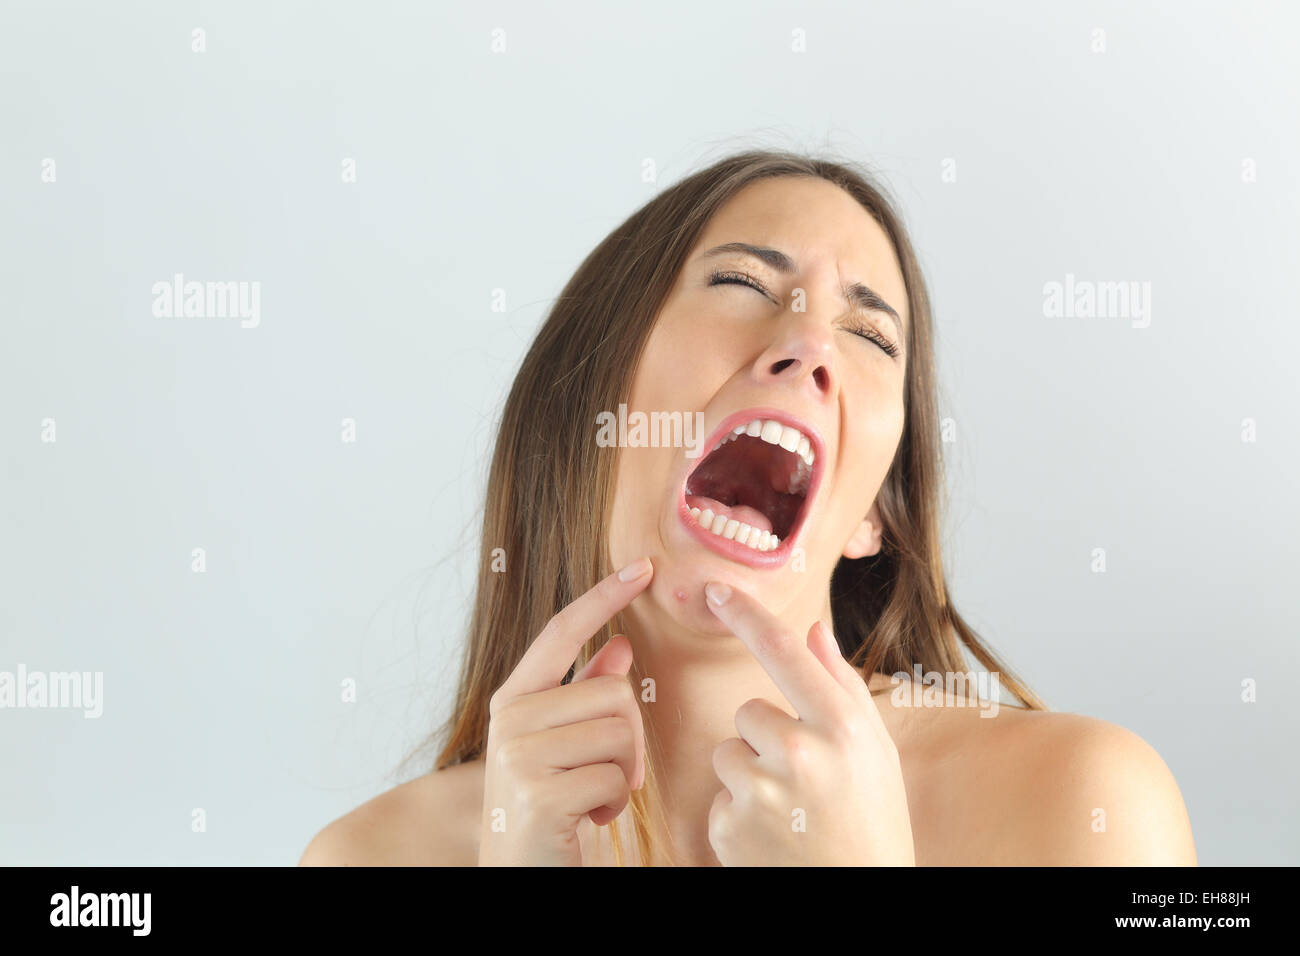 Girl crying while pressing a pimple on her chin with a grey background Stock Photo